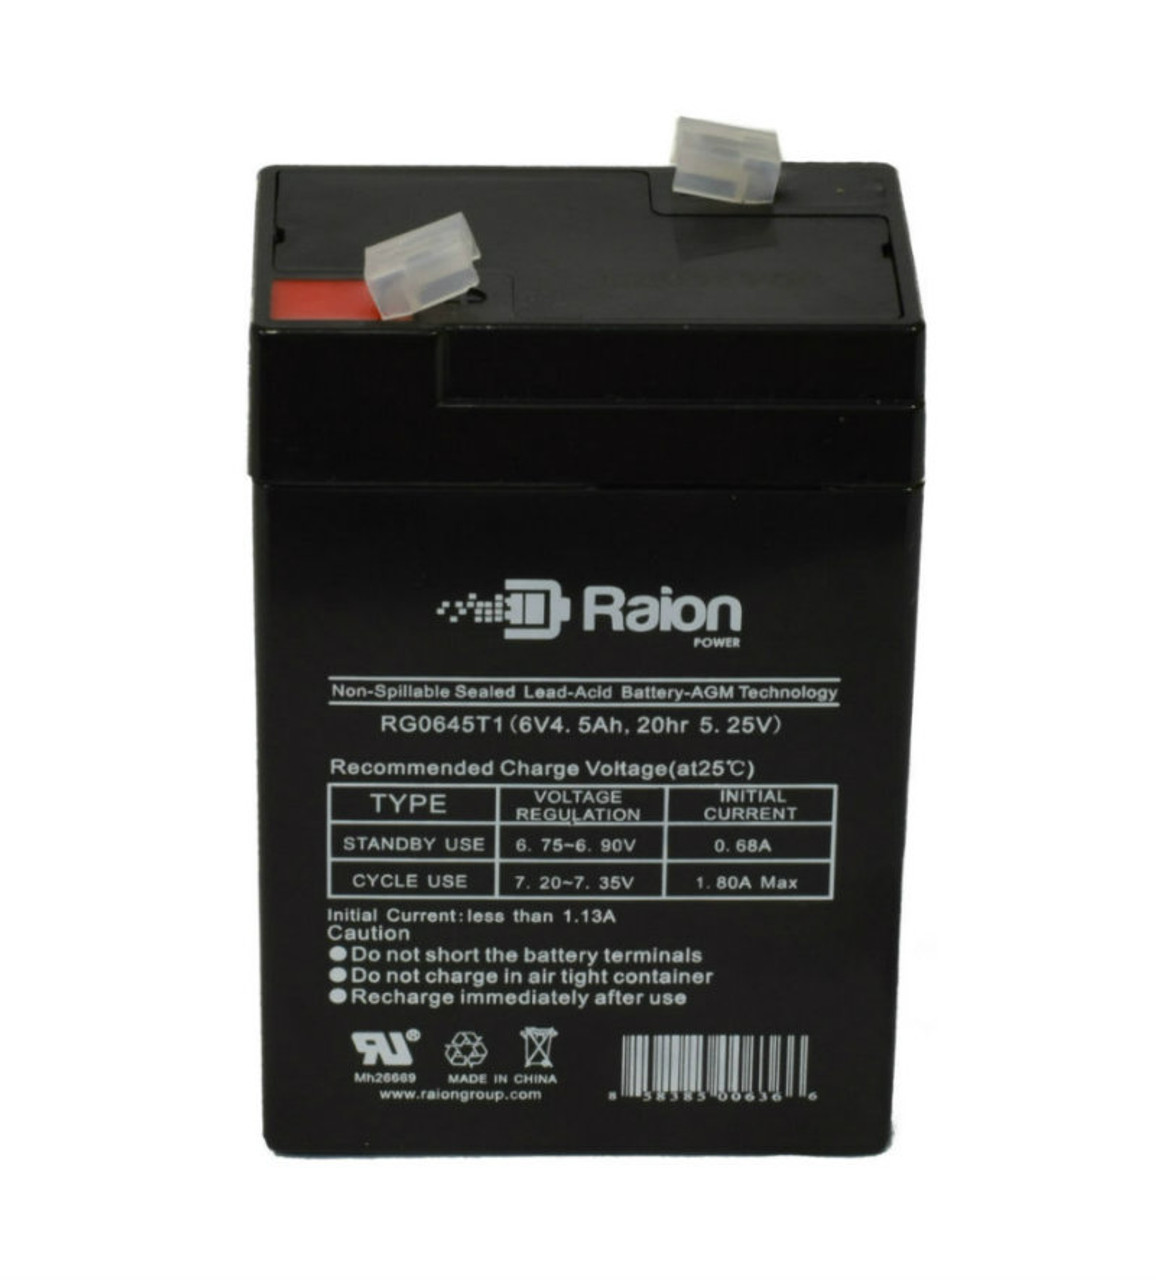 Raion Power RG0645T1 Replacement Battery Cartridge for HRX 6-4